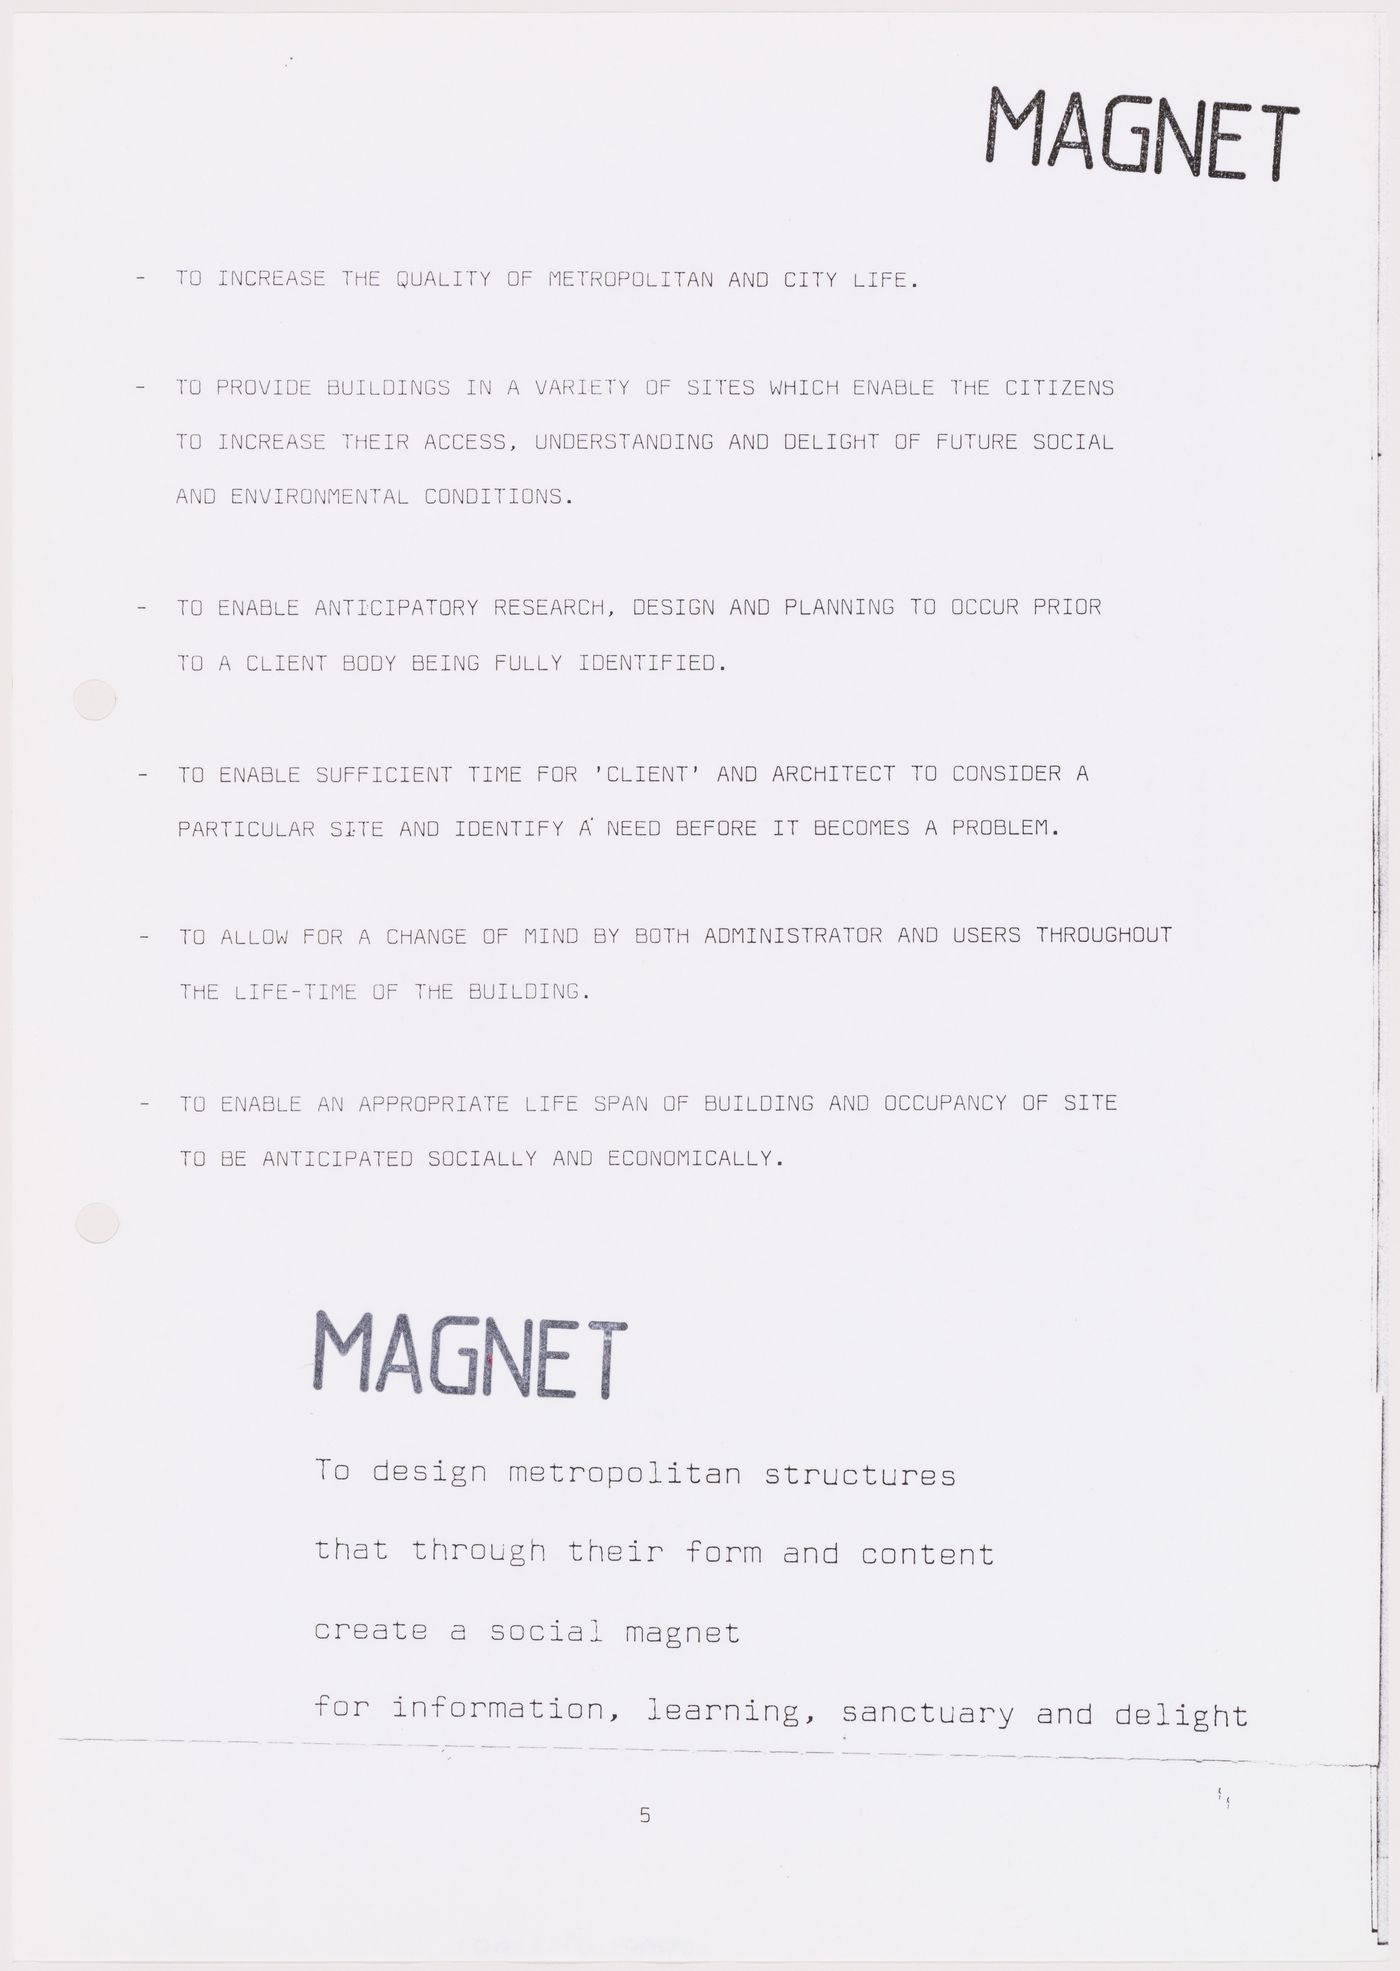 List of goals from the project file "Magnet"